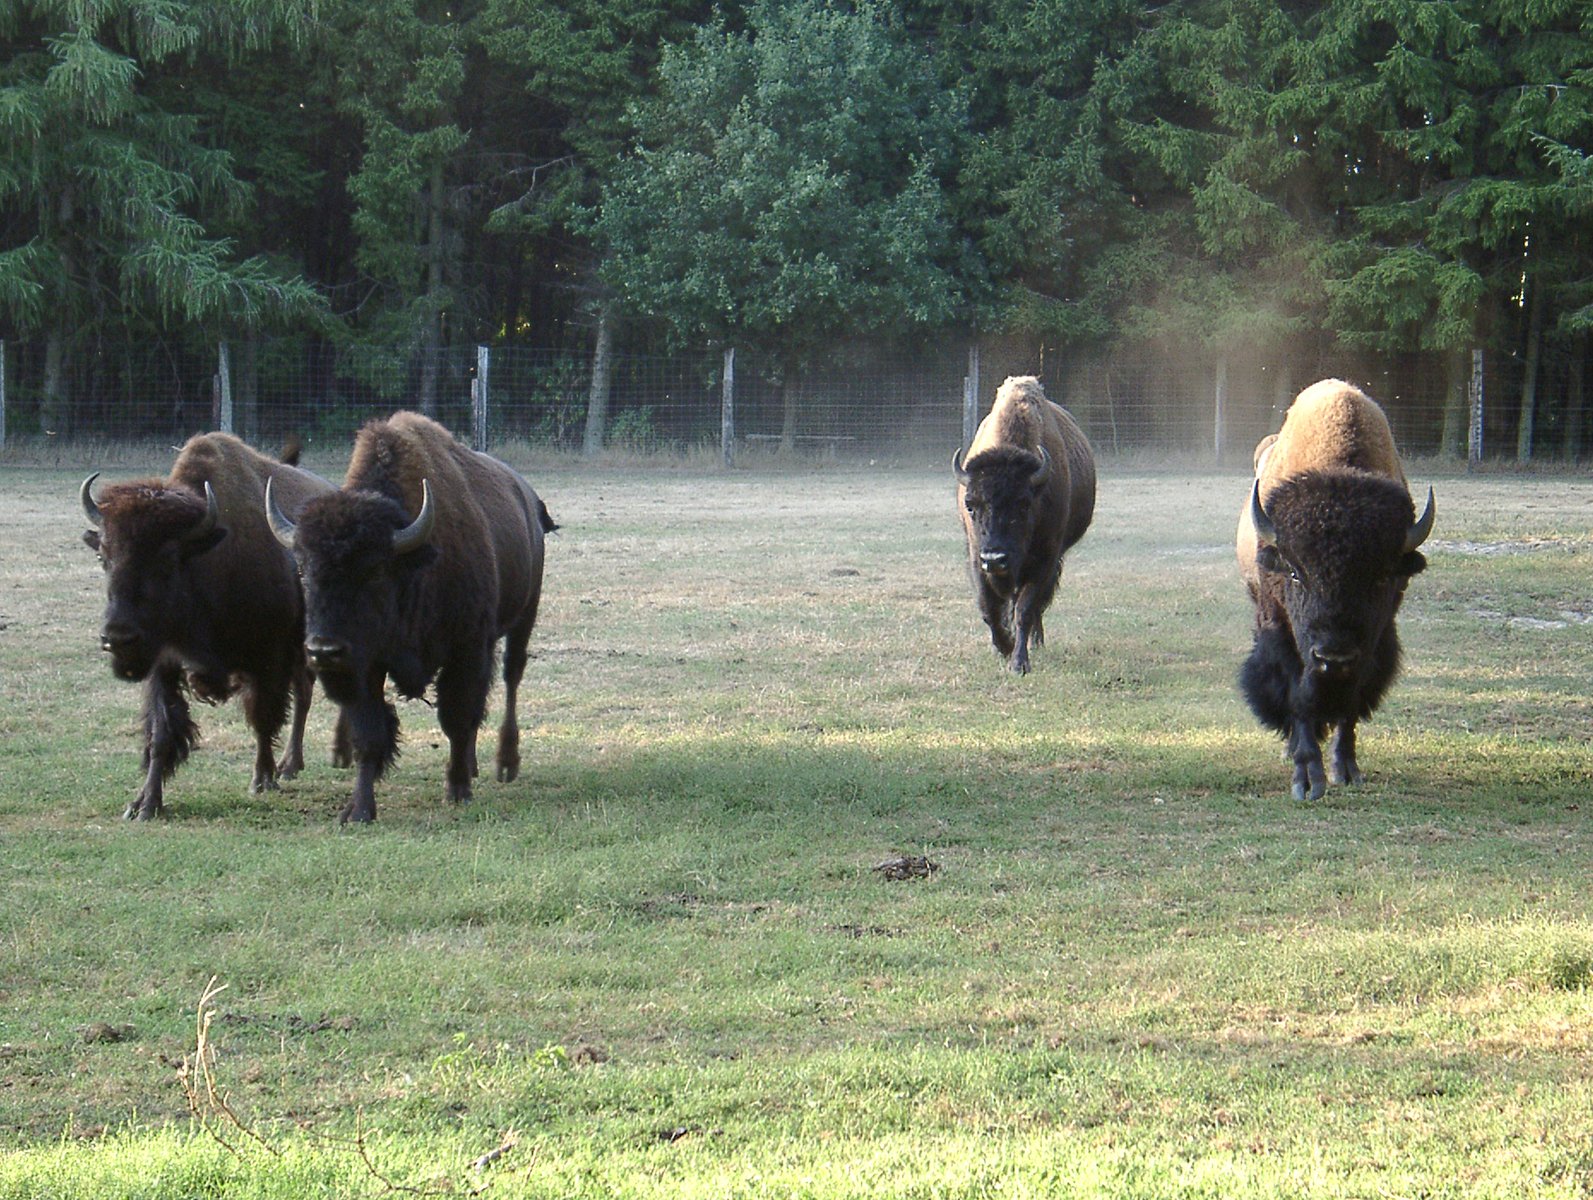 bison run to the right in front of a fenced field